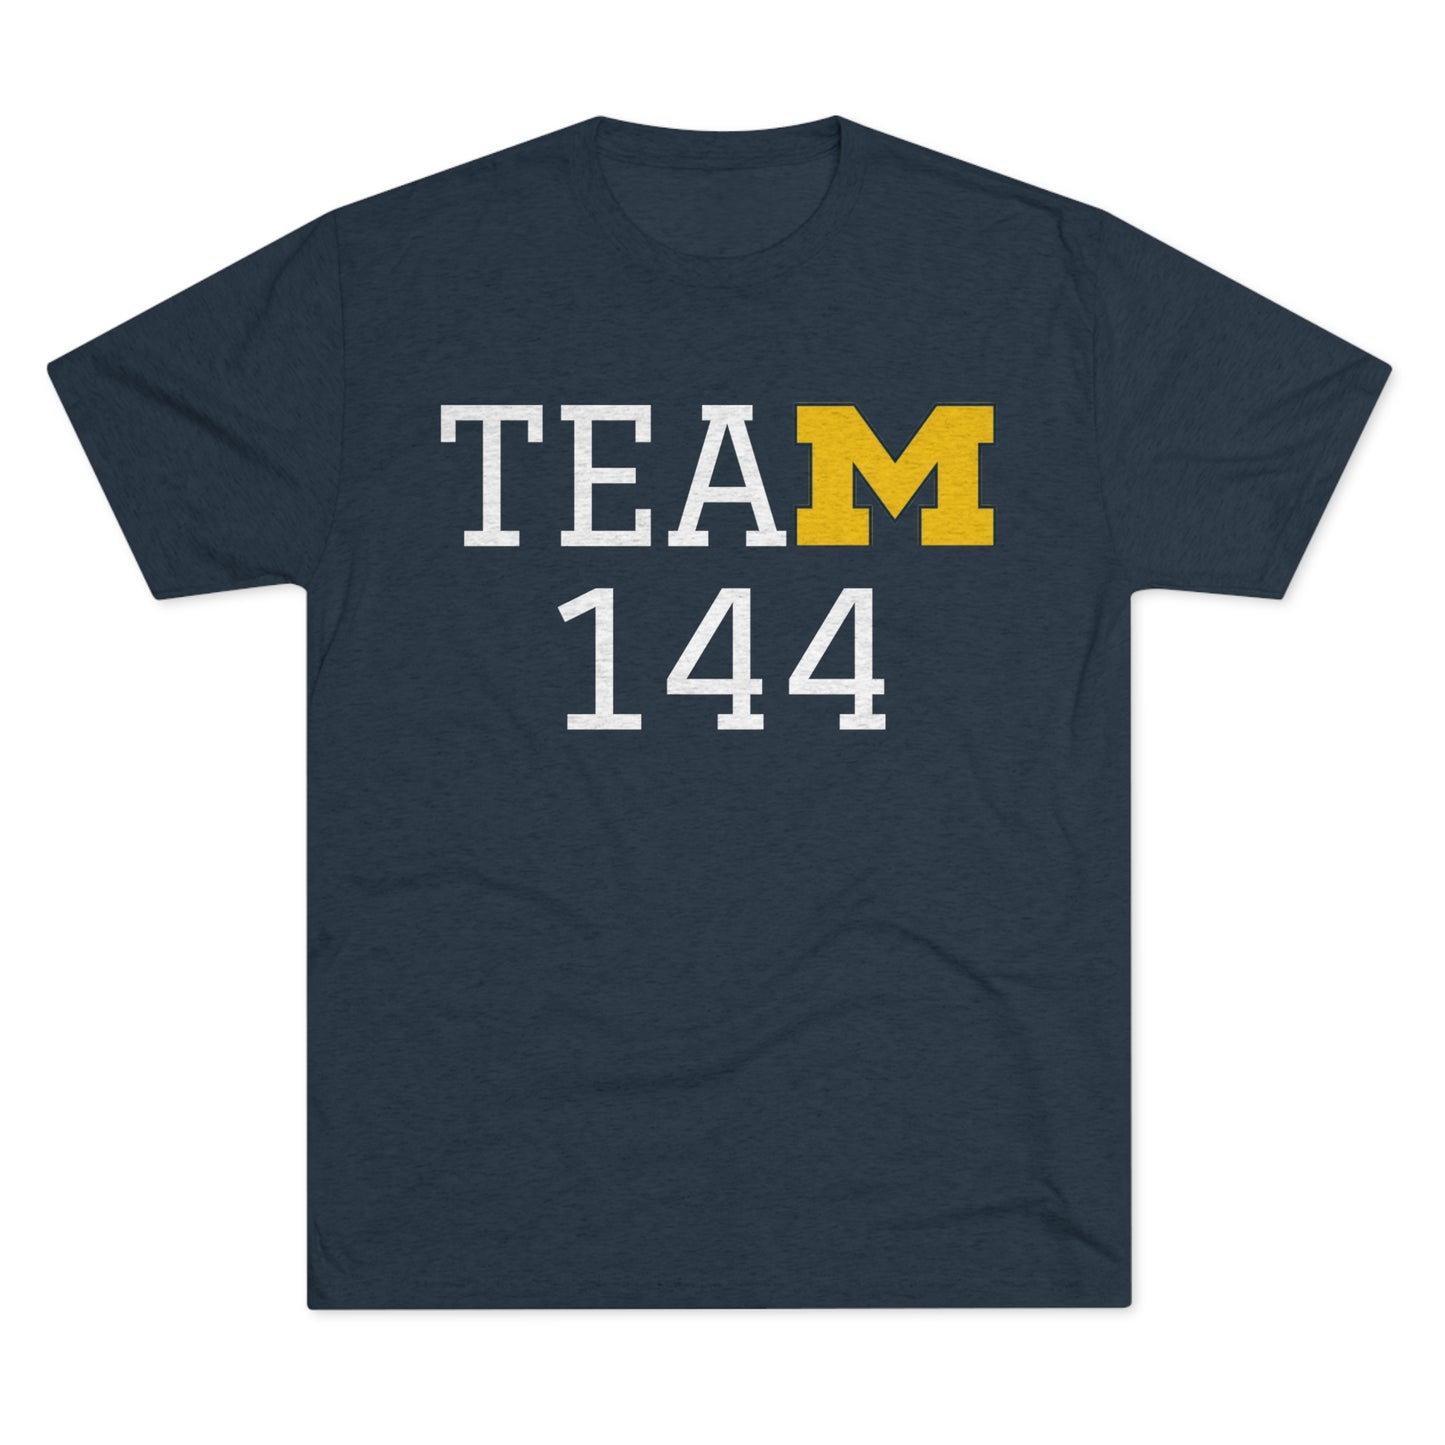 Michigan "Team 144" Tri-Blend Tee: Unbelievably Soft Comfort with a Stylish Edge - Perfect for Enthusiasts!